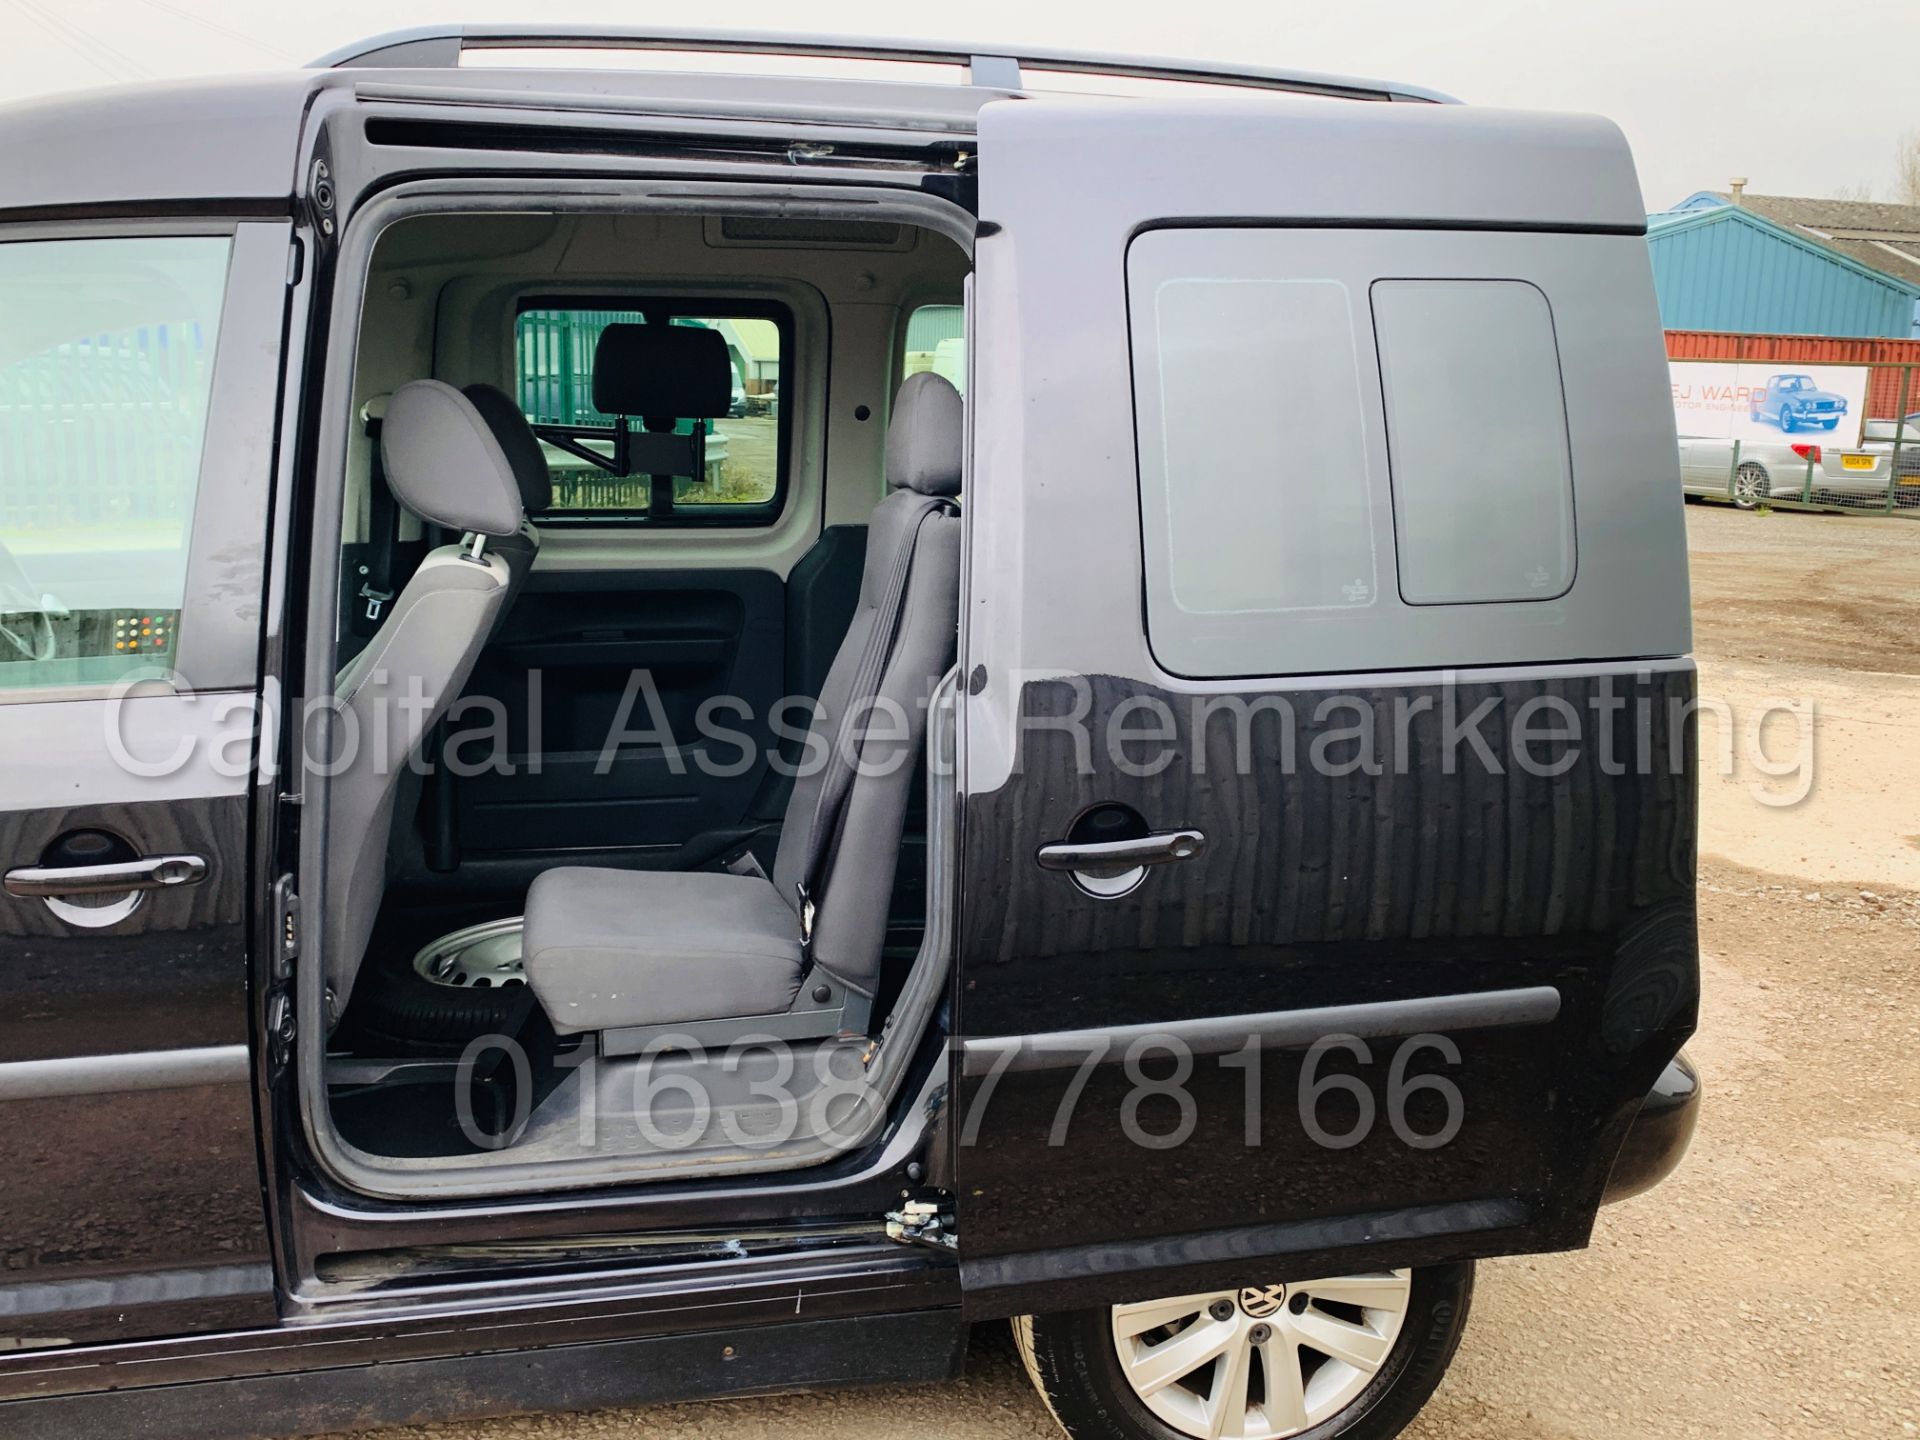 VOLKSWAGEN CADDY C20 *LIFE* DISABILITY ACCESS /WAV (2011) '1.6 TDI - AUTO' *A/C* (35,000 MILES ONLY) - Image 28 of 41